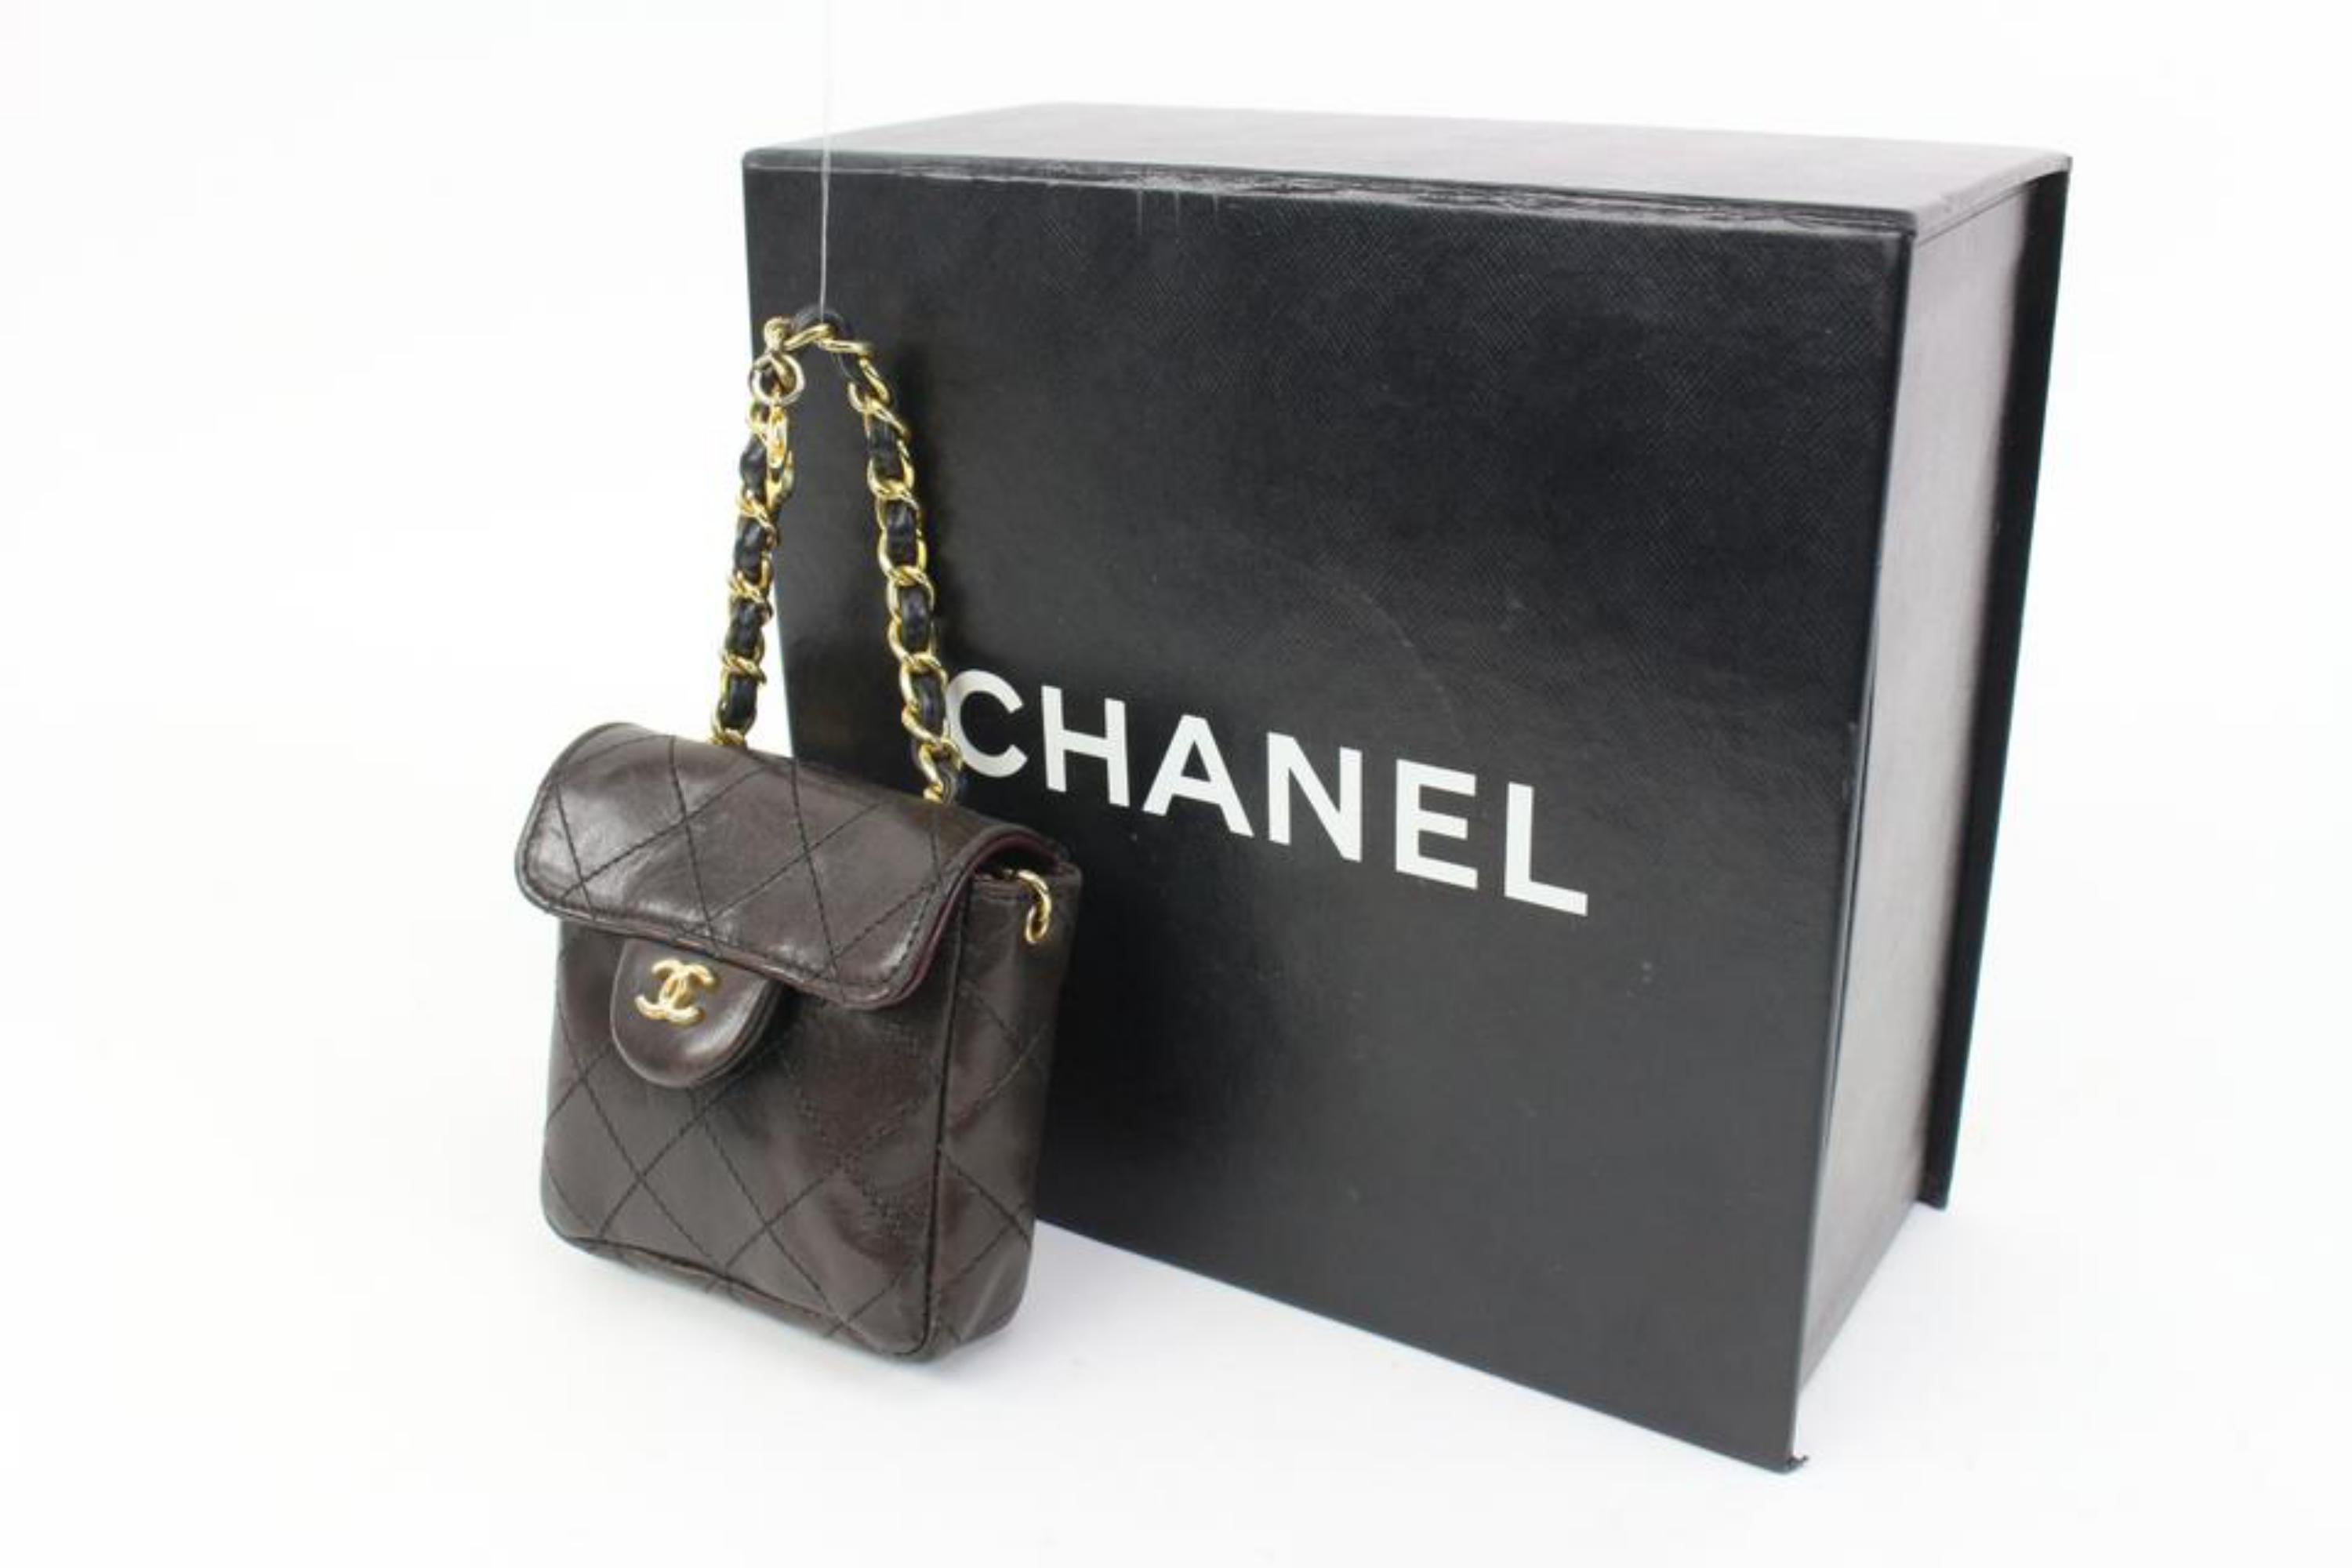 Chanel Black Quilted Lambskin Micro Classic Flap Mini Bag 50ck325s
Made In: France
Measurements: Length:  3